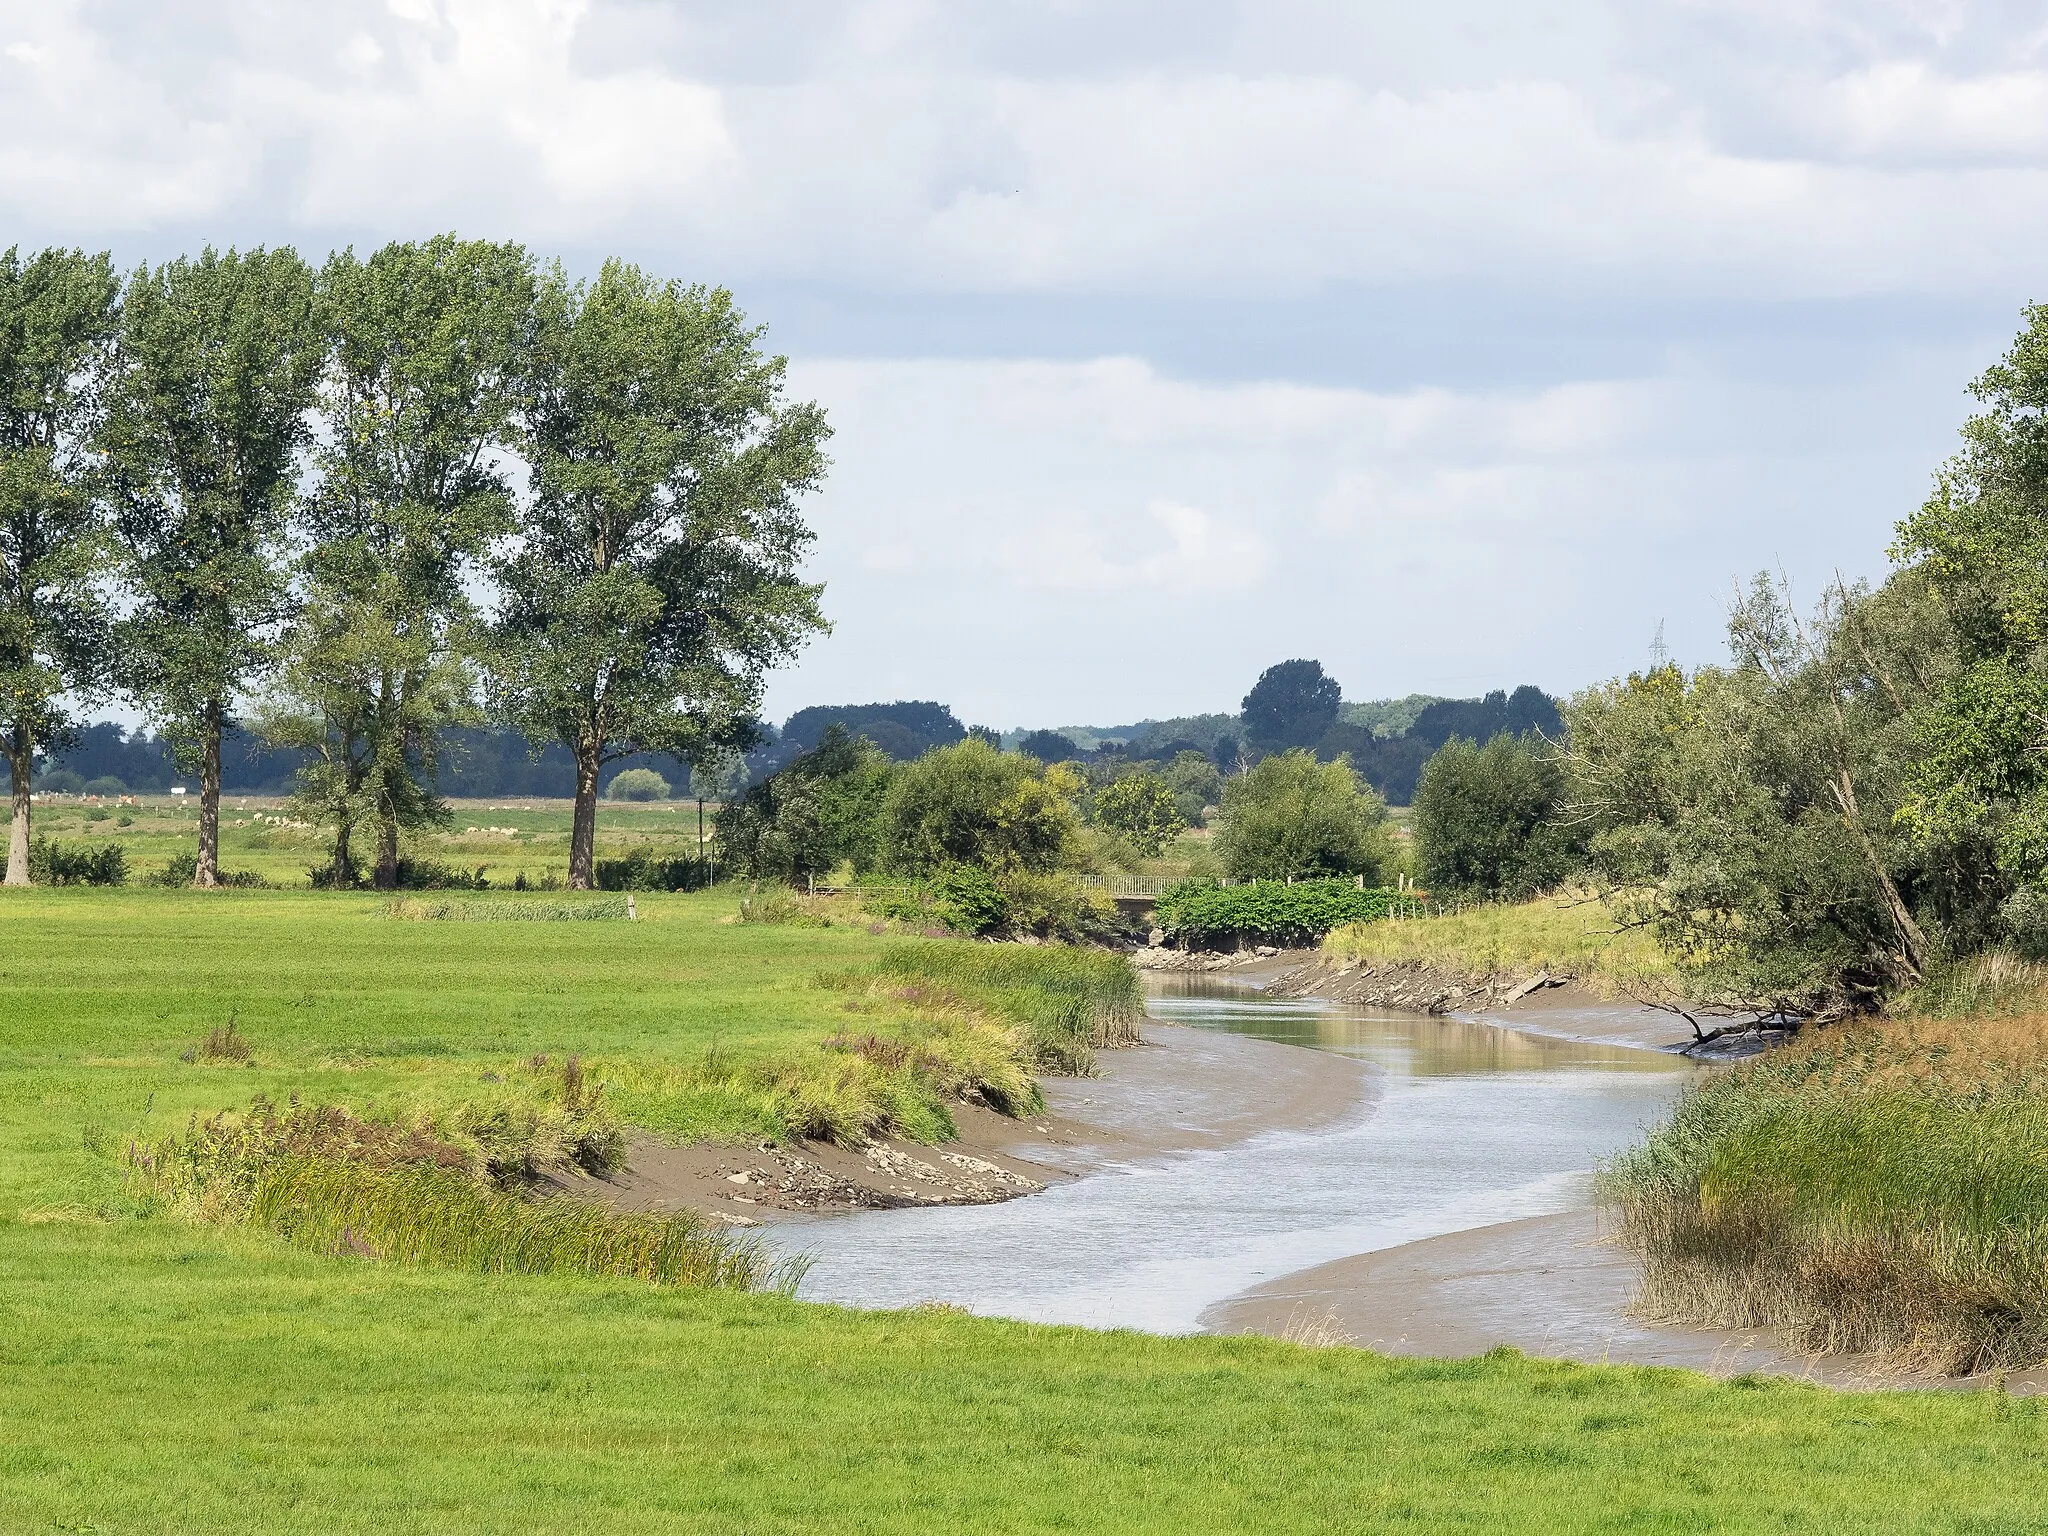 Photo showing: The eastern part of the Haseldorfer Binnenelbe is named Hetlinger Binnenelbe. This shot was taken at the flood barrier where the name is changed once more into Wedeler Au. This barrier marks the eastern limit of the natural reserve.